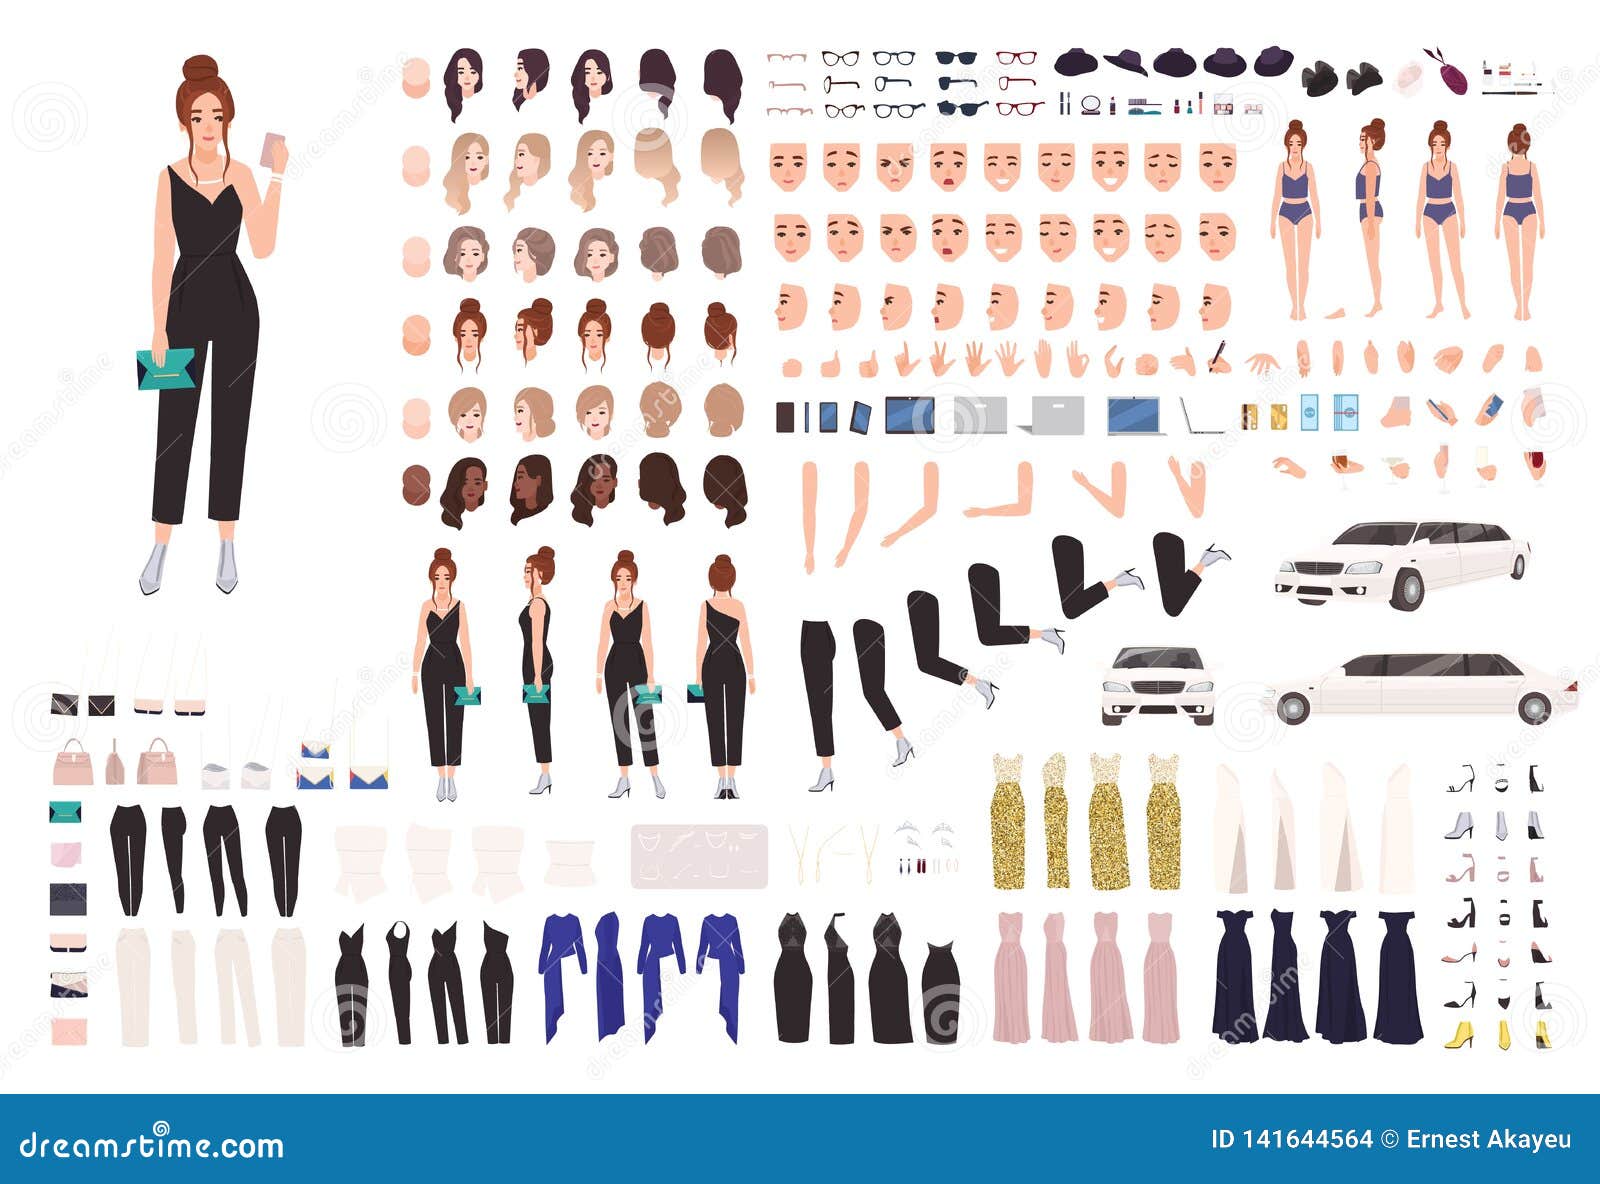 elegant young woman animation set or constructor kit. collection of body parts, gestures, postures, evening clothes